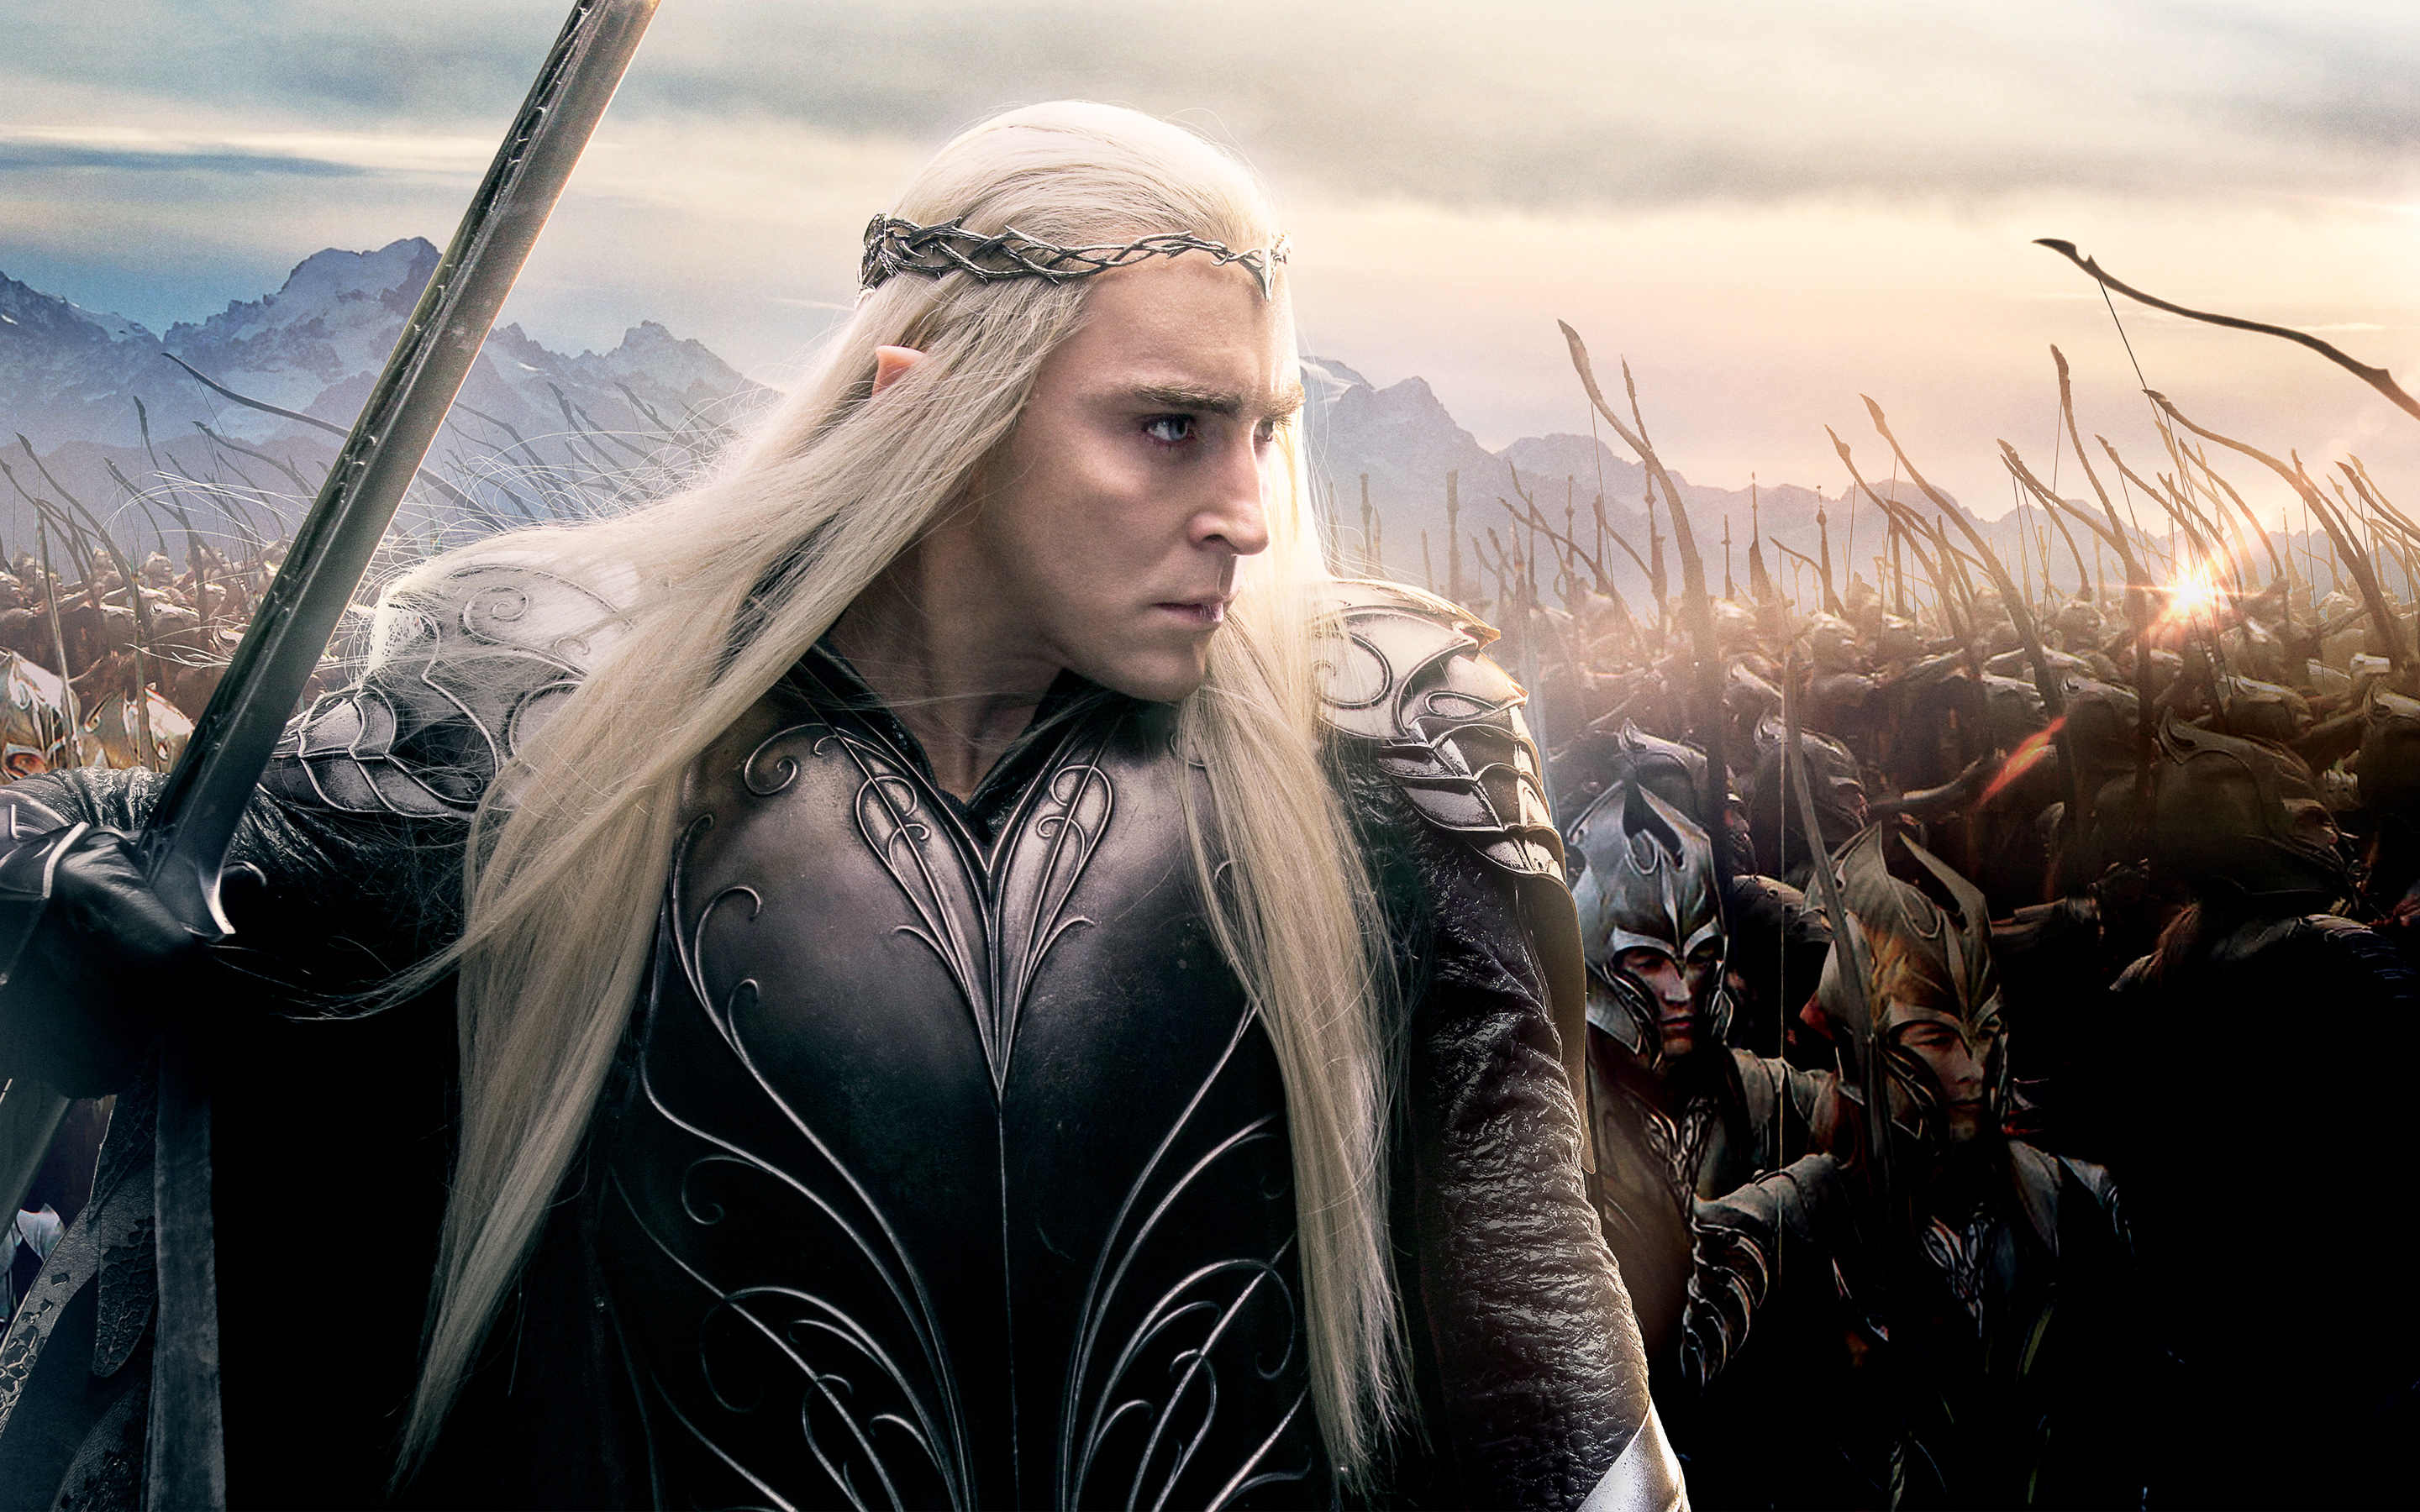 free downloads The Hobbit: The Battle of the Five Ar